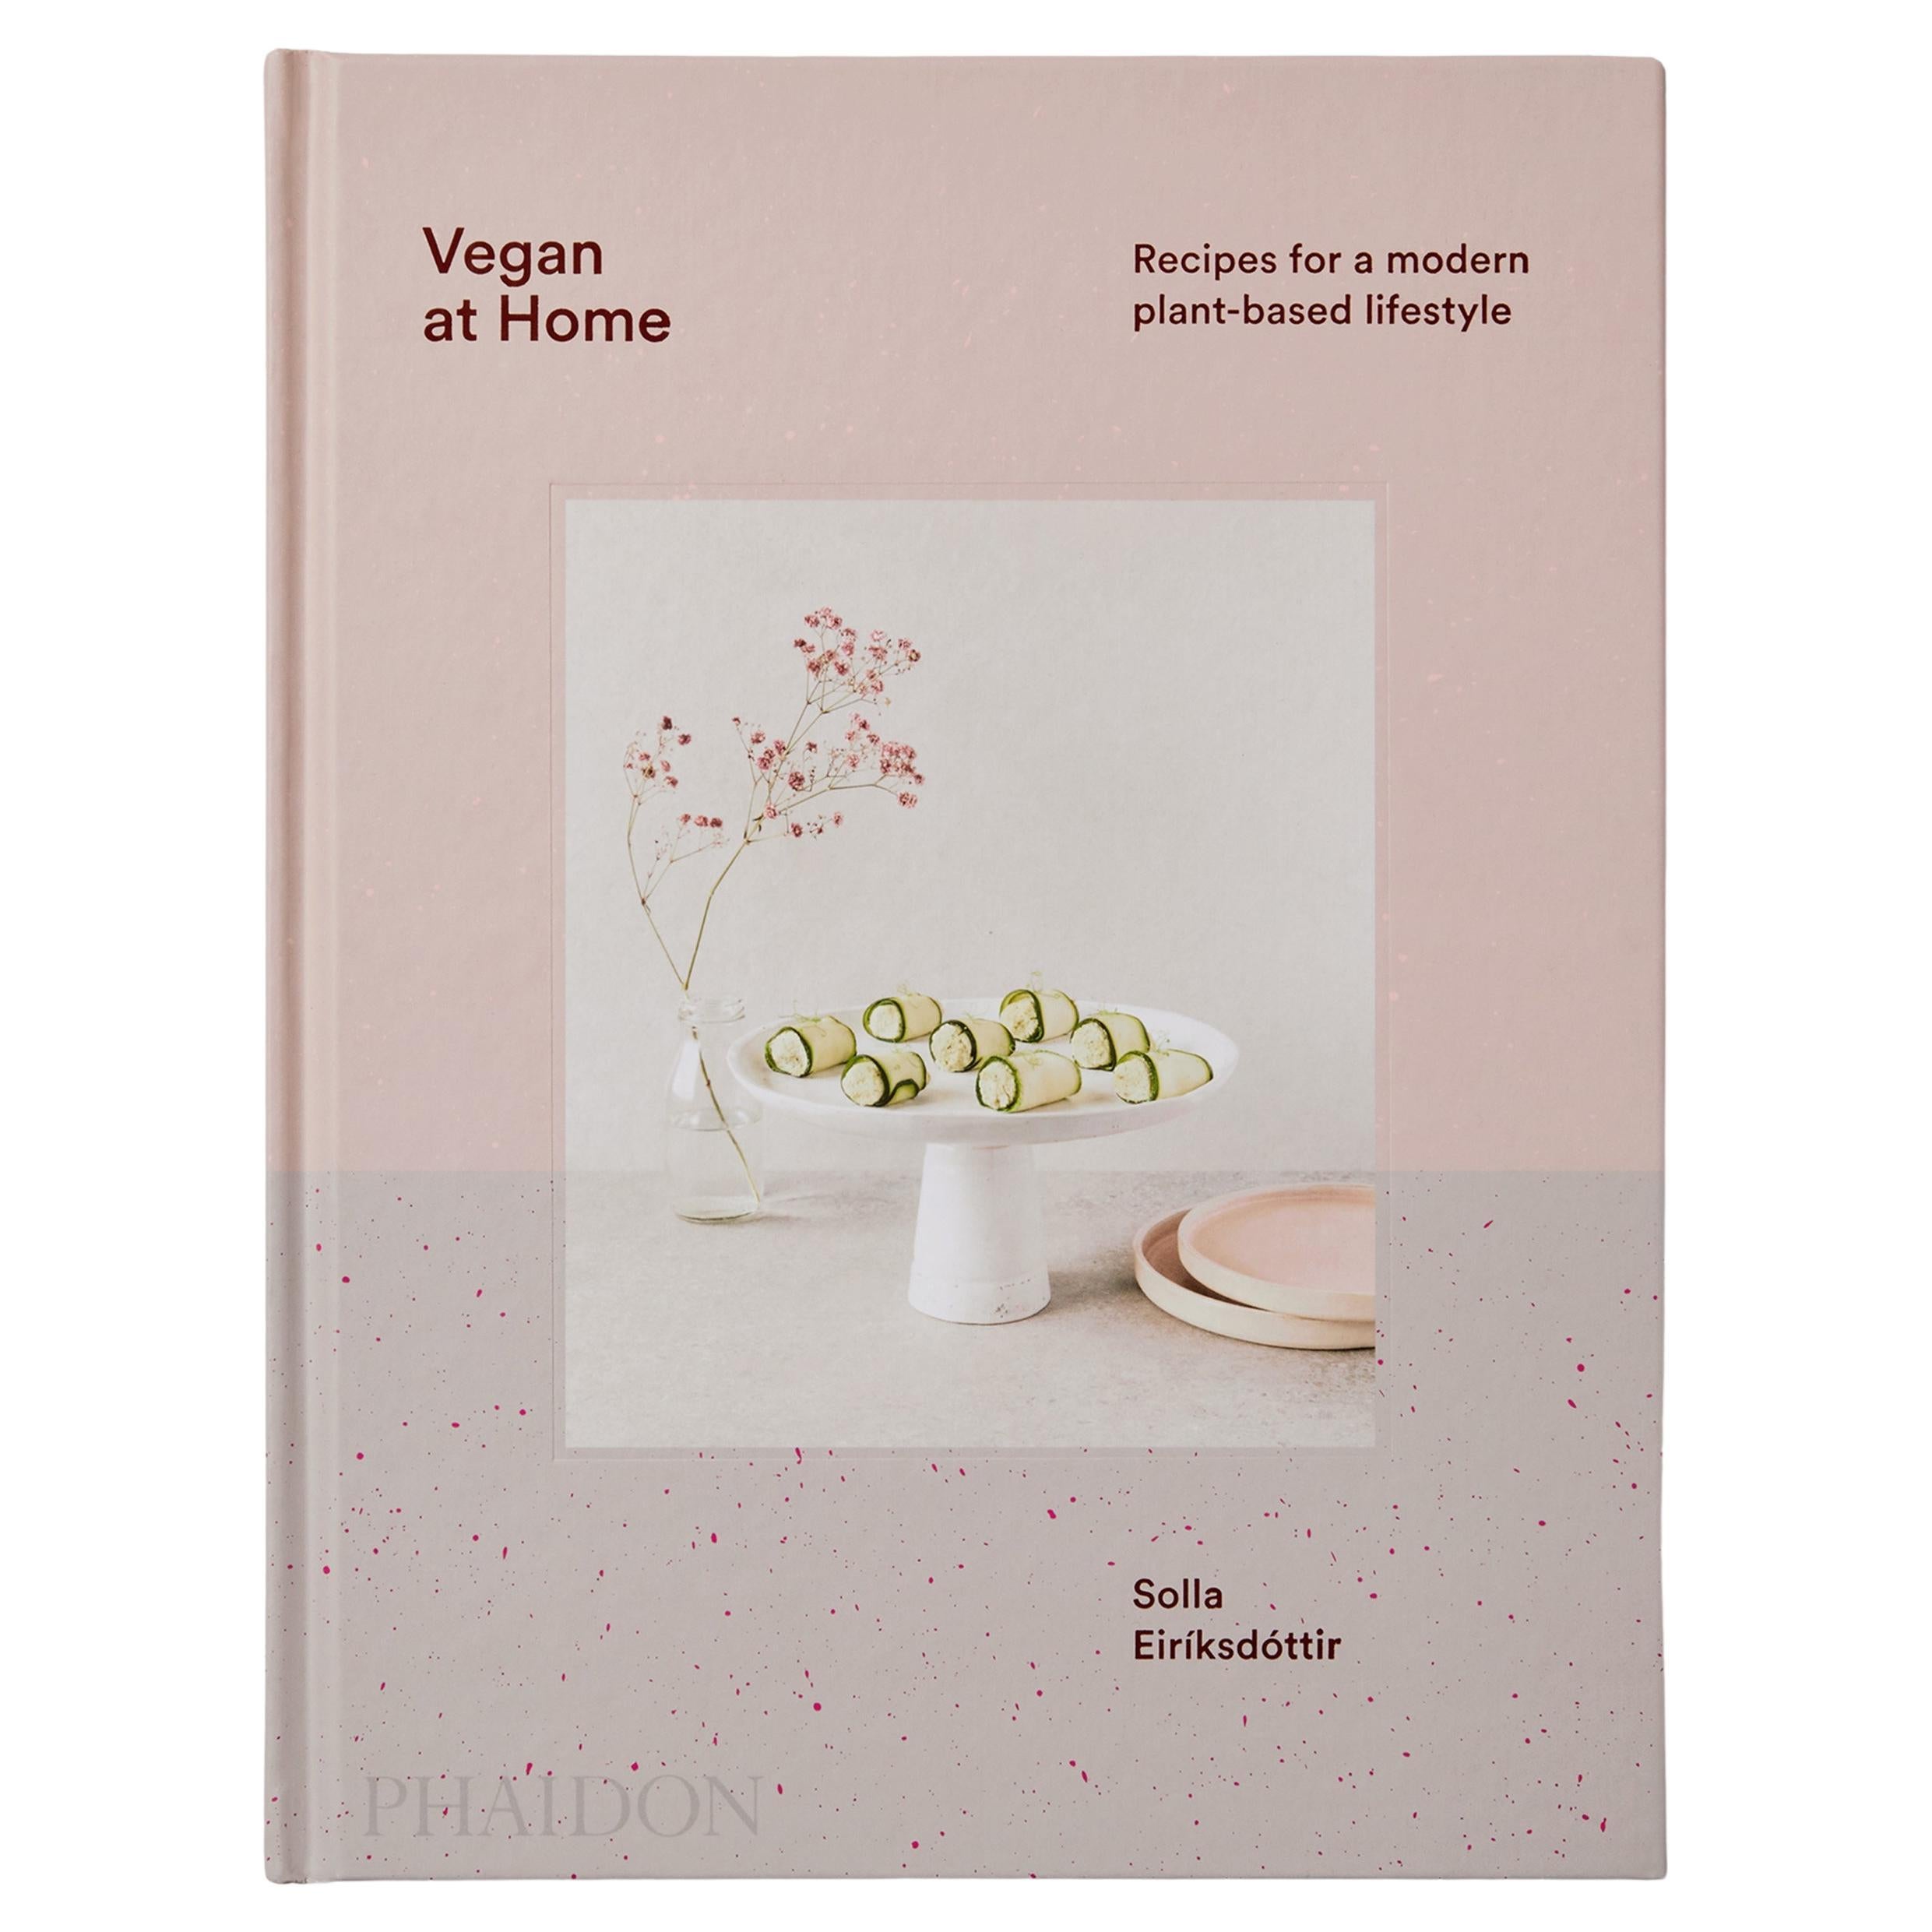 Vegan at Home: Recipes for a modern plant-based lifestyle